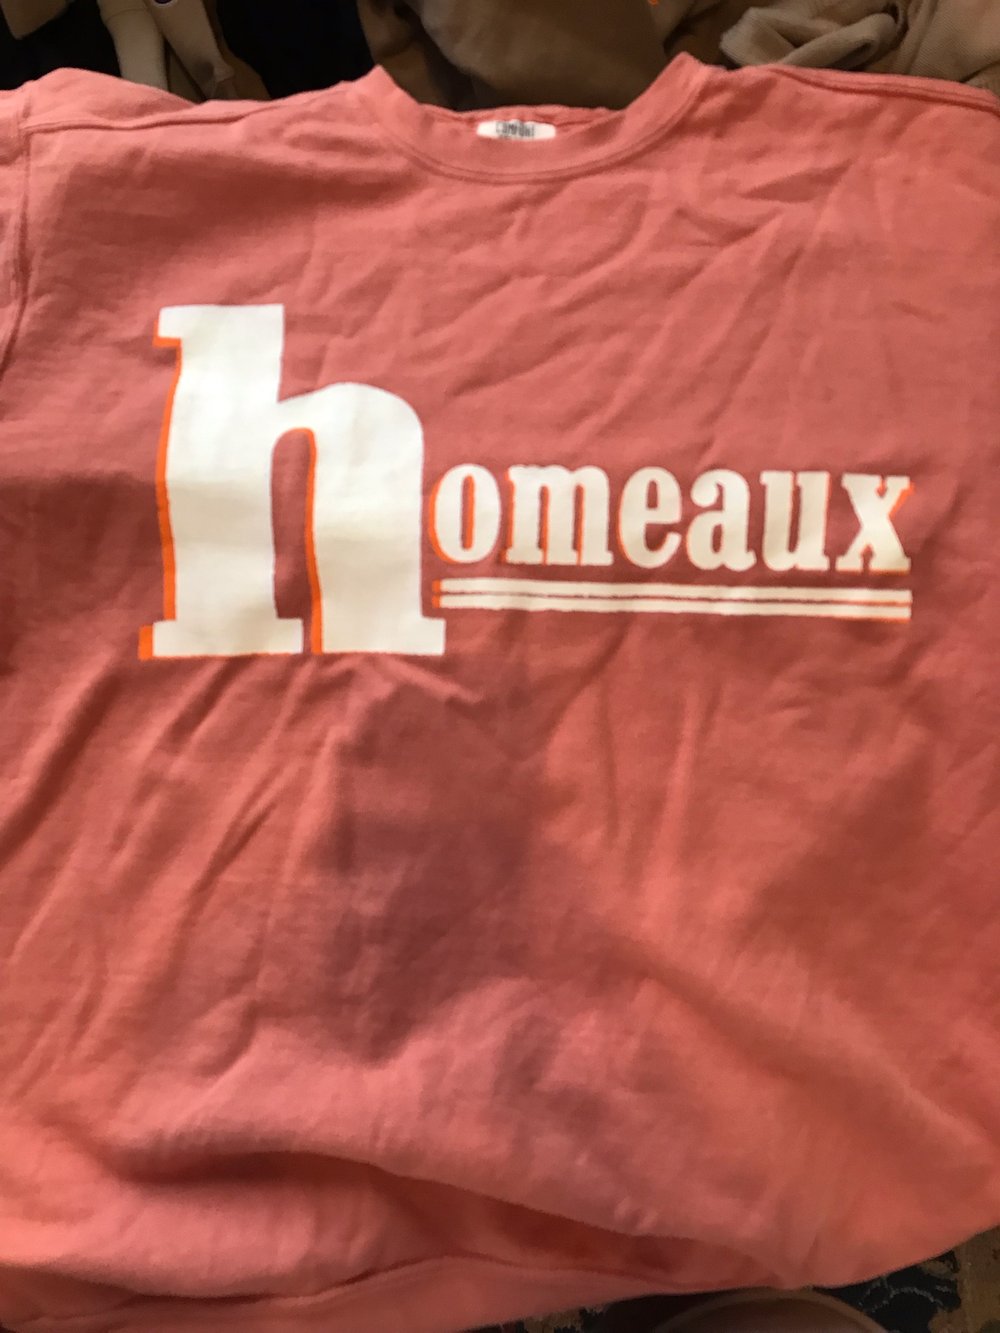 M& L Homeaux sweaters/hoodies on hand**limited sizes